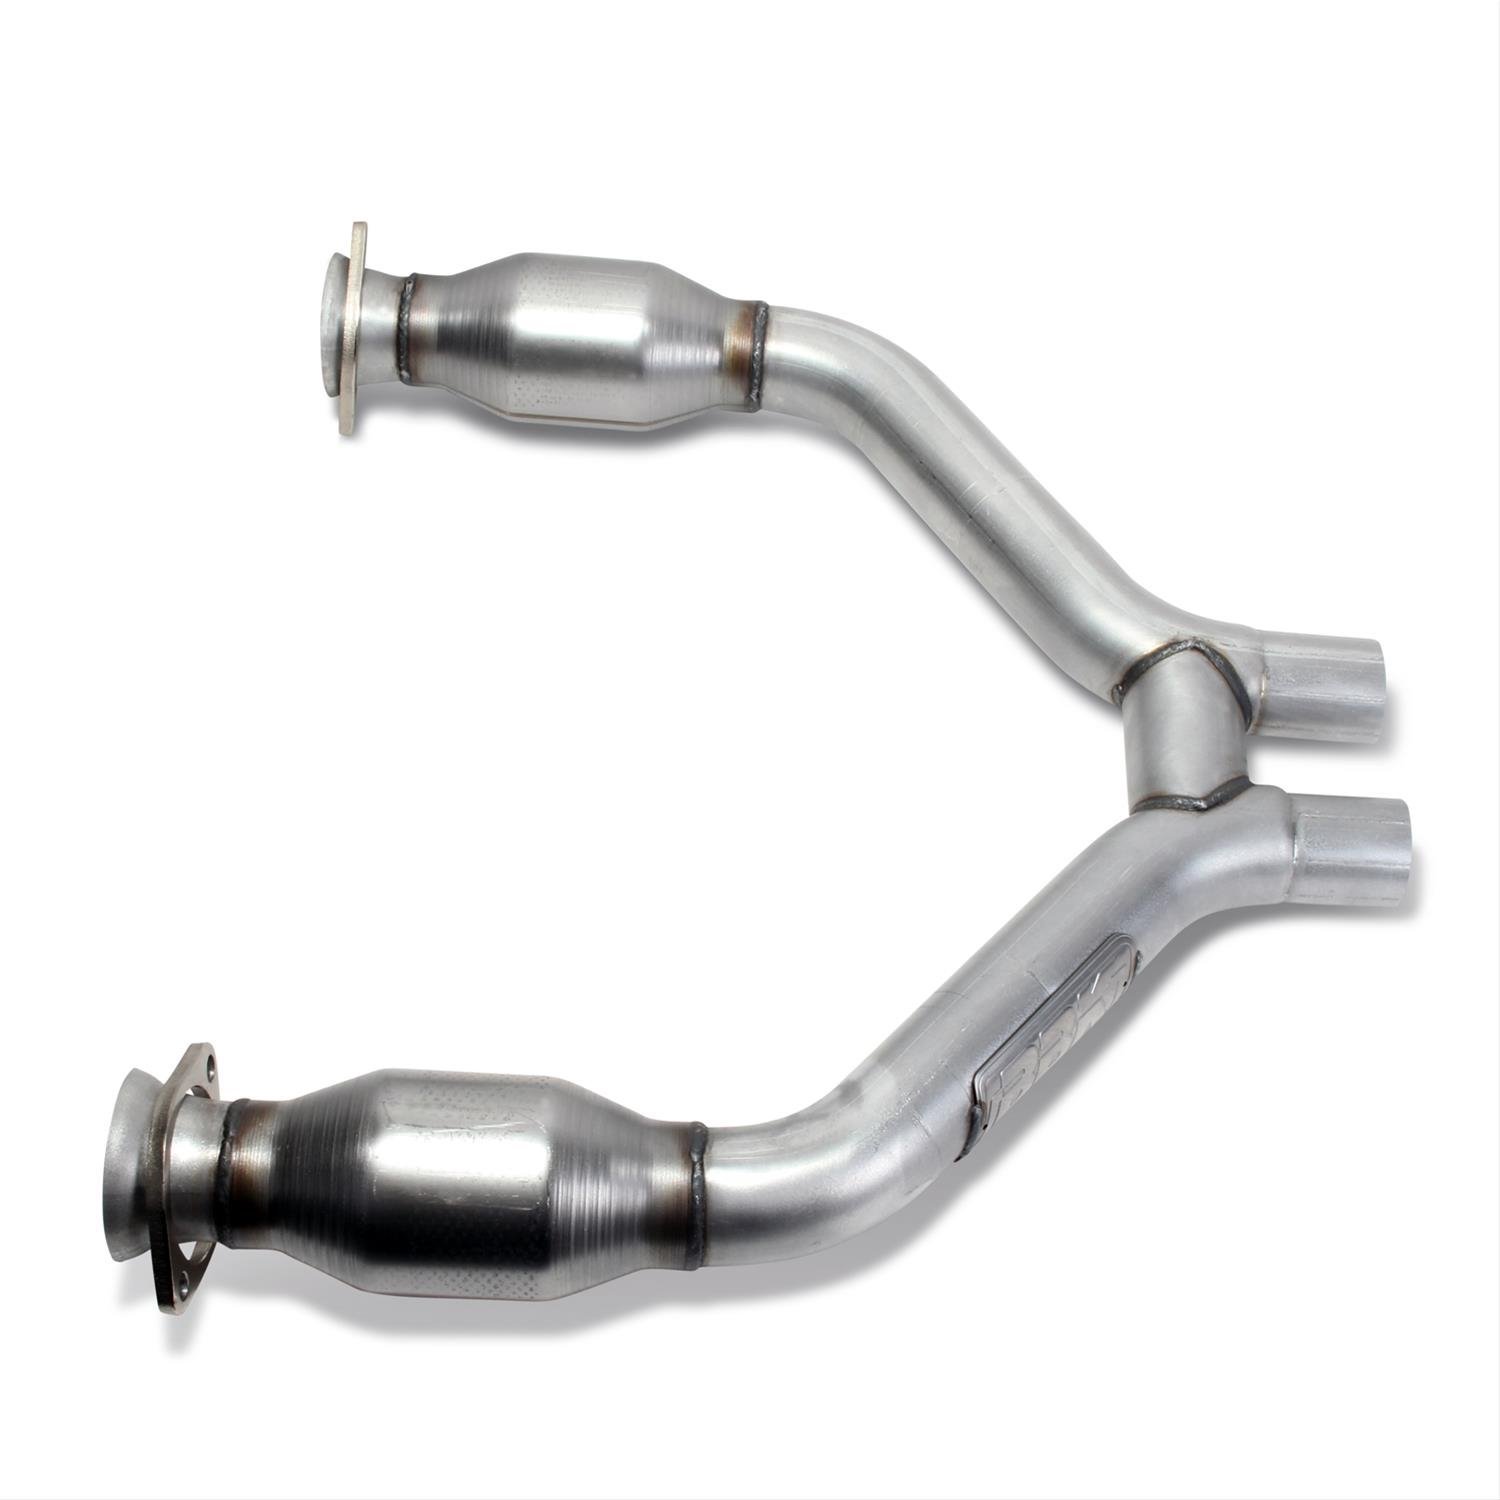 2015-16 MUSTANG V6 SHORT MID H PIPE WITH CONVERTERS TO BE USED WITH 1642 SERIES HEADERS